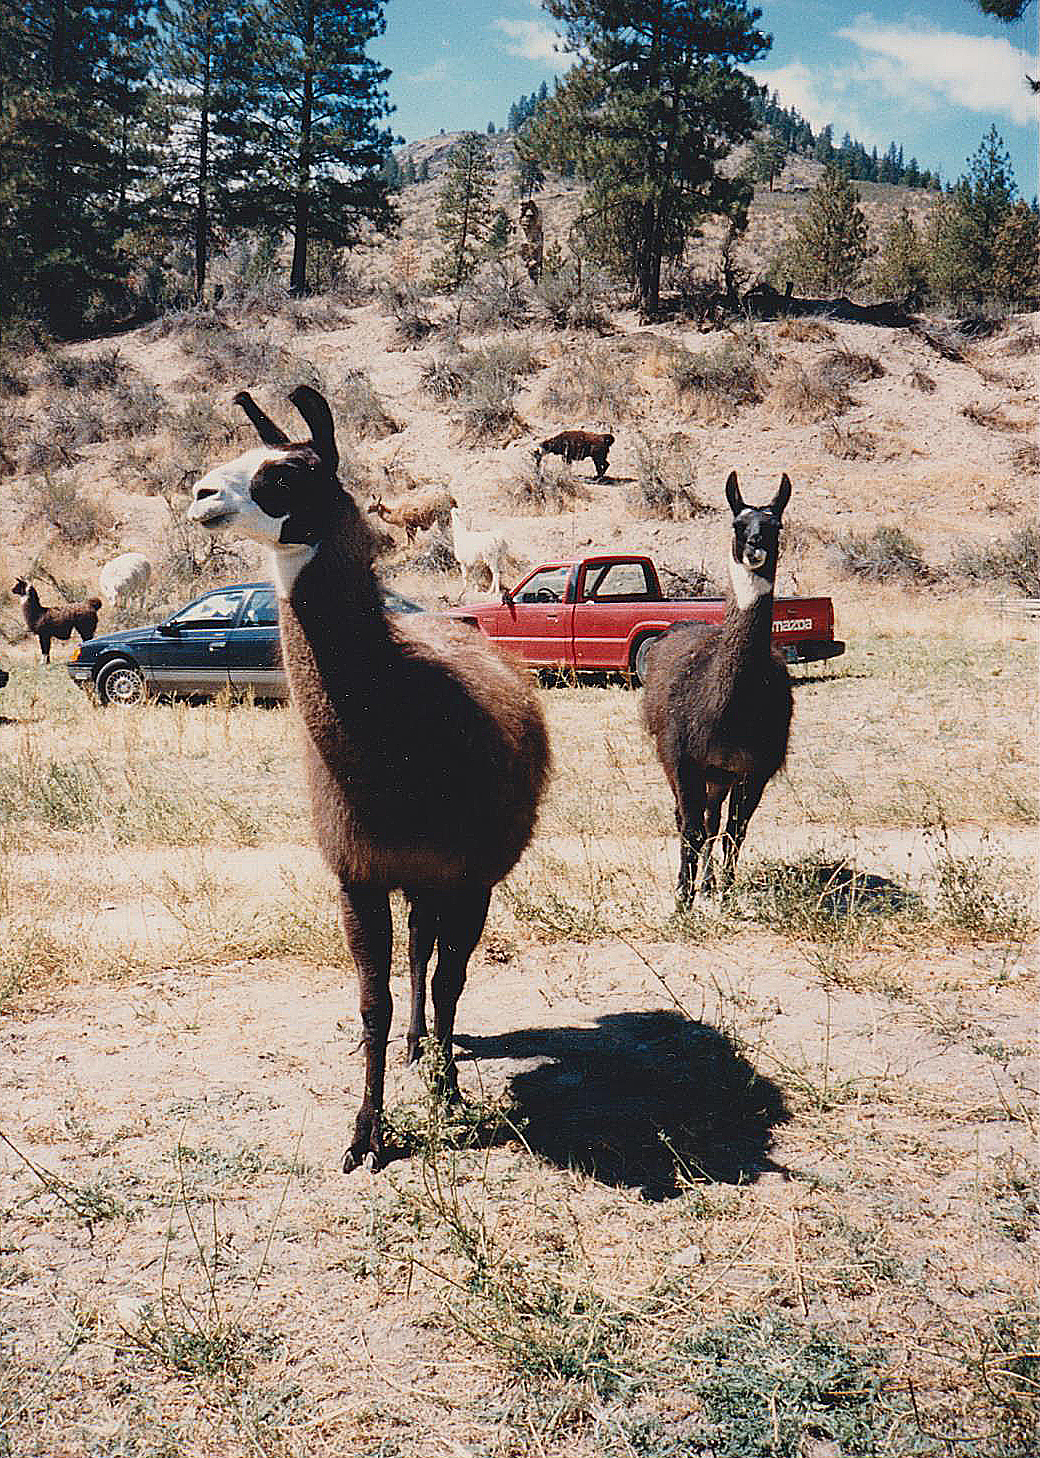 1987 Llamas, Our carving companions